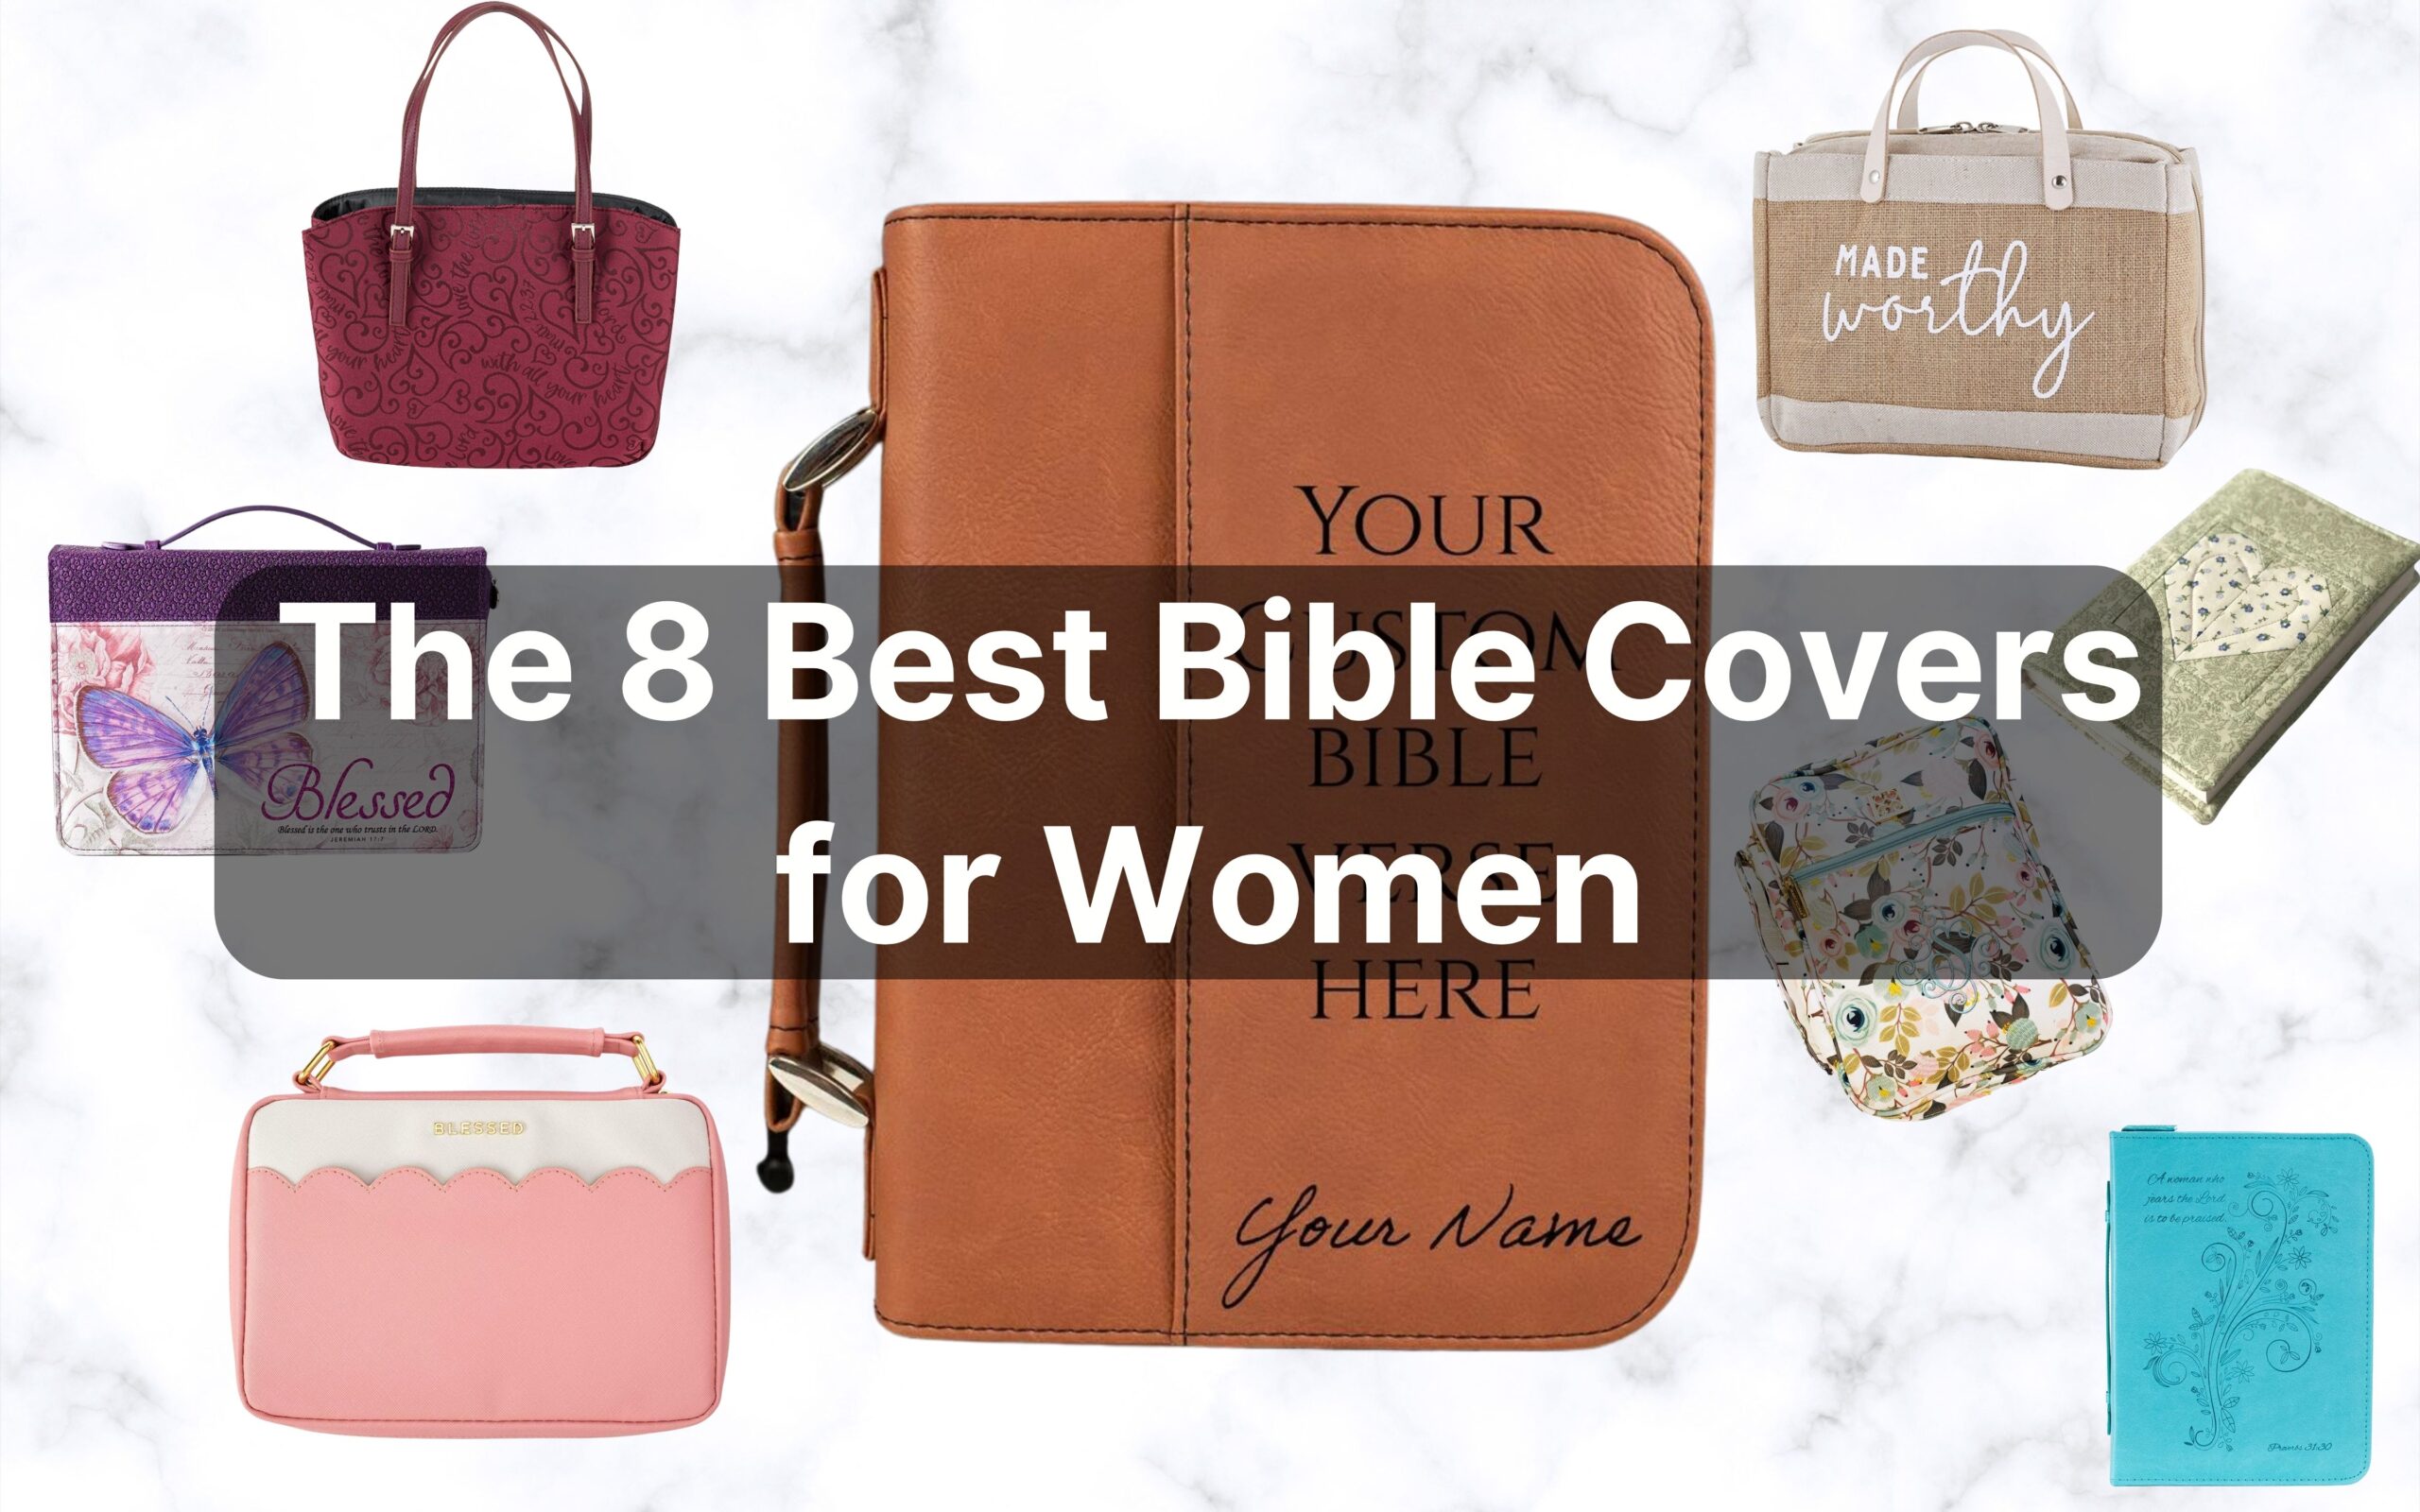 The 8 Best Bible Covers for Women.